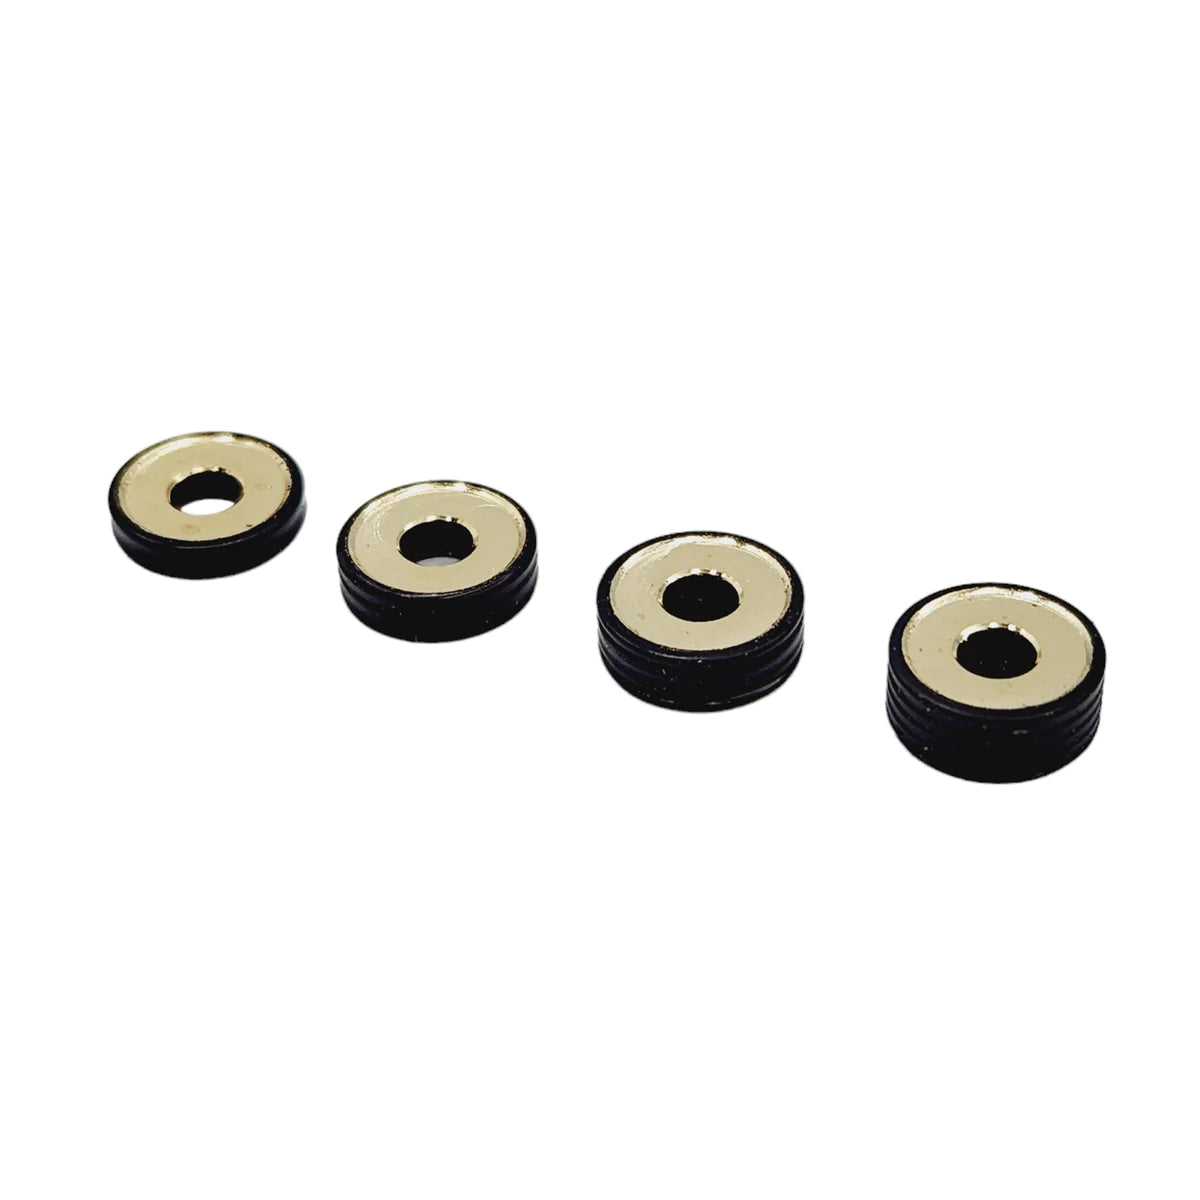 RC MAKER Large Contact Ringed Roll Center Shim Set - Brass